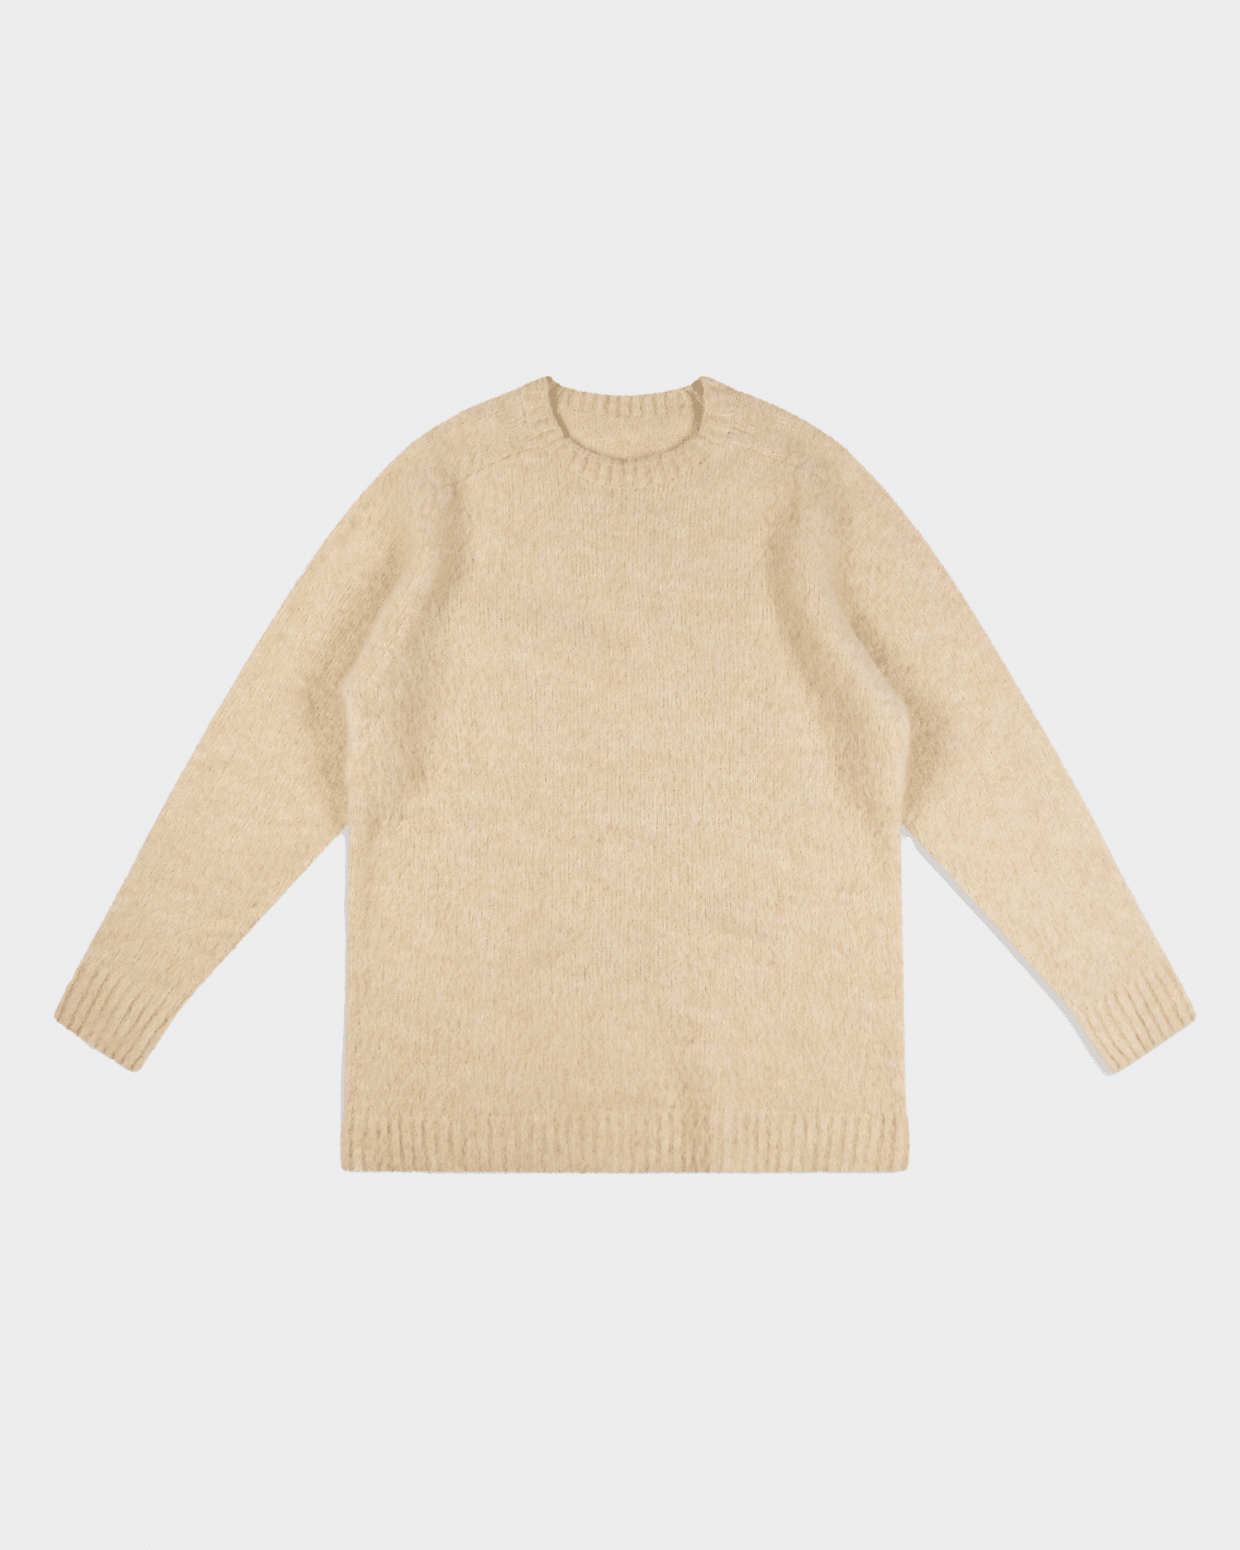 N.A.S.A. Oyster Knit